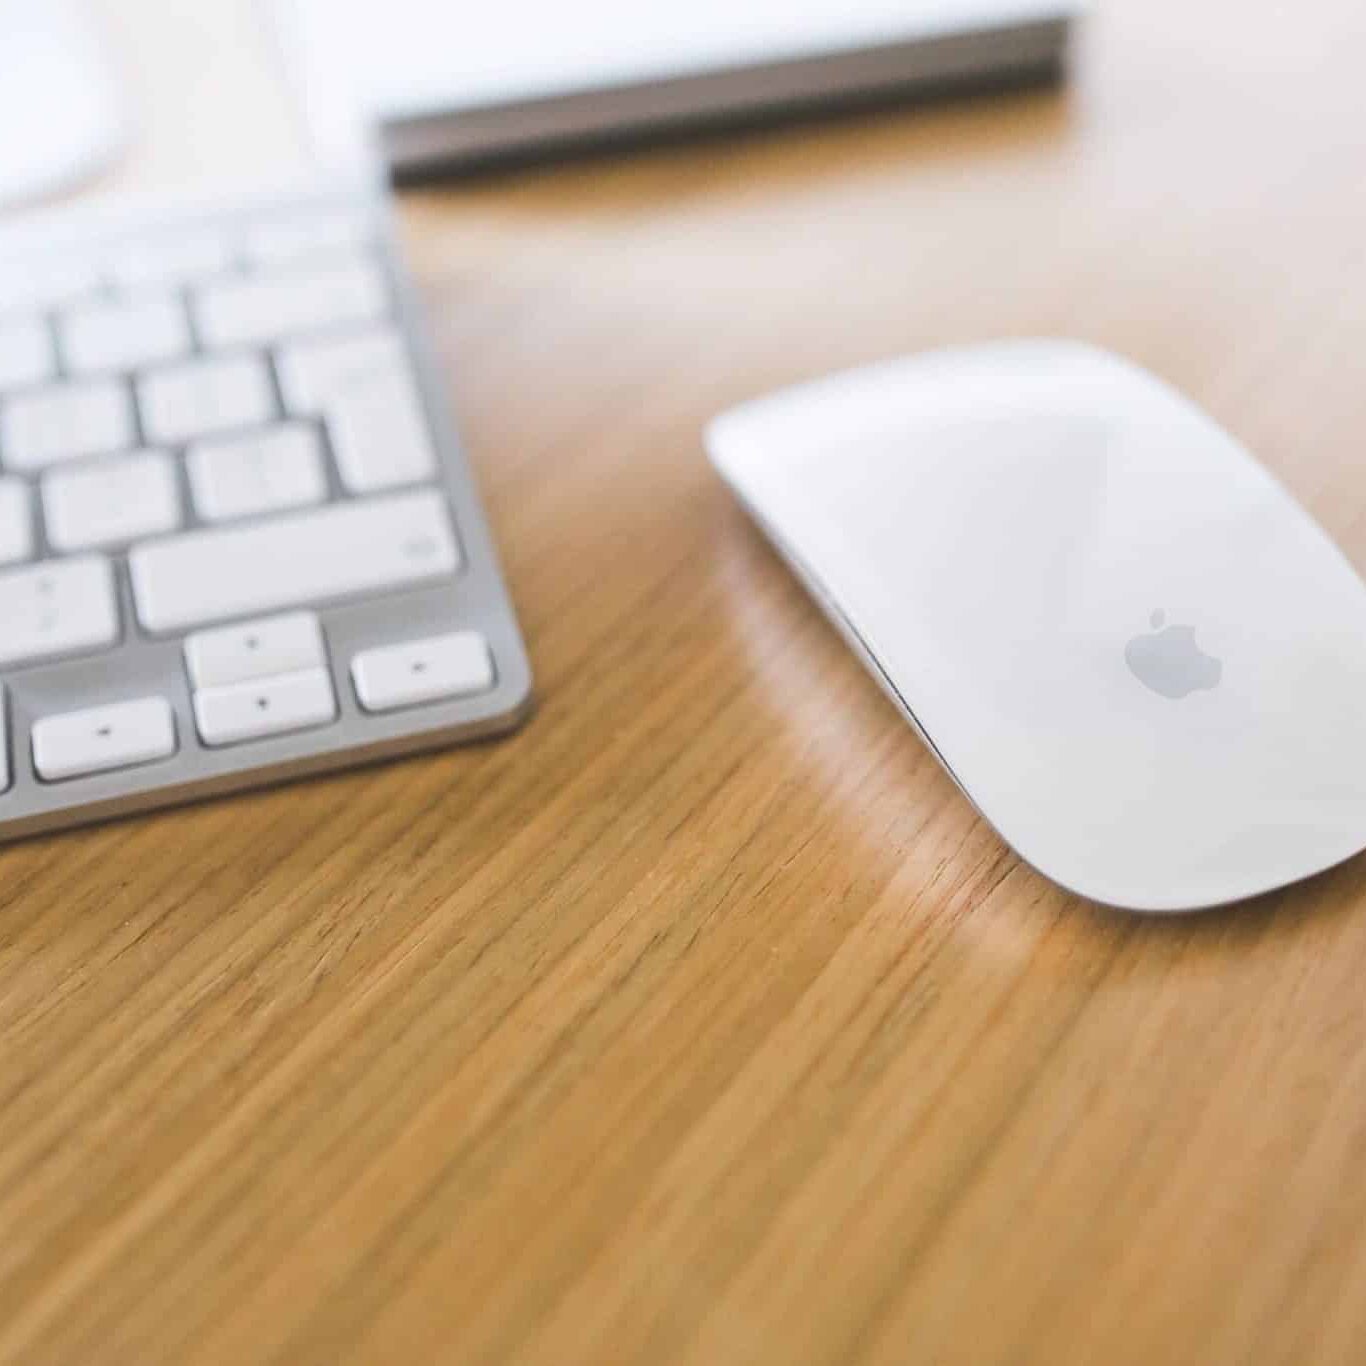 Tips and Tools Blog - Apple Magic Mouse